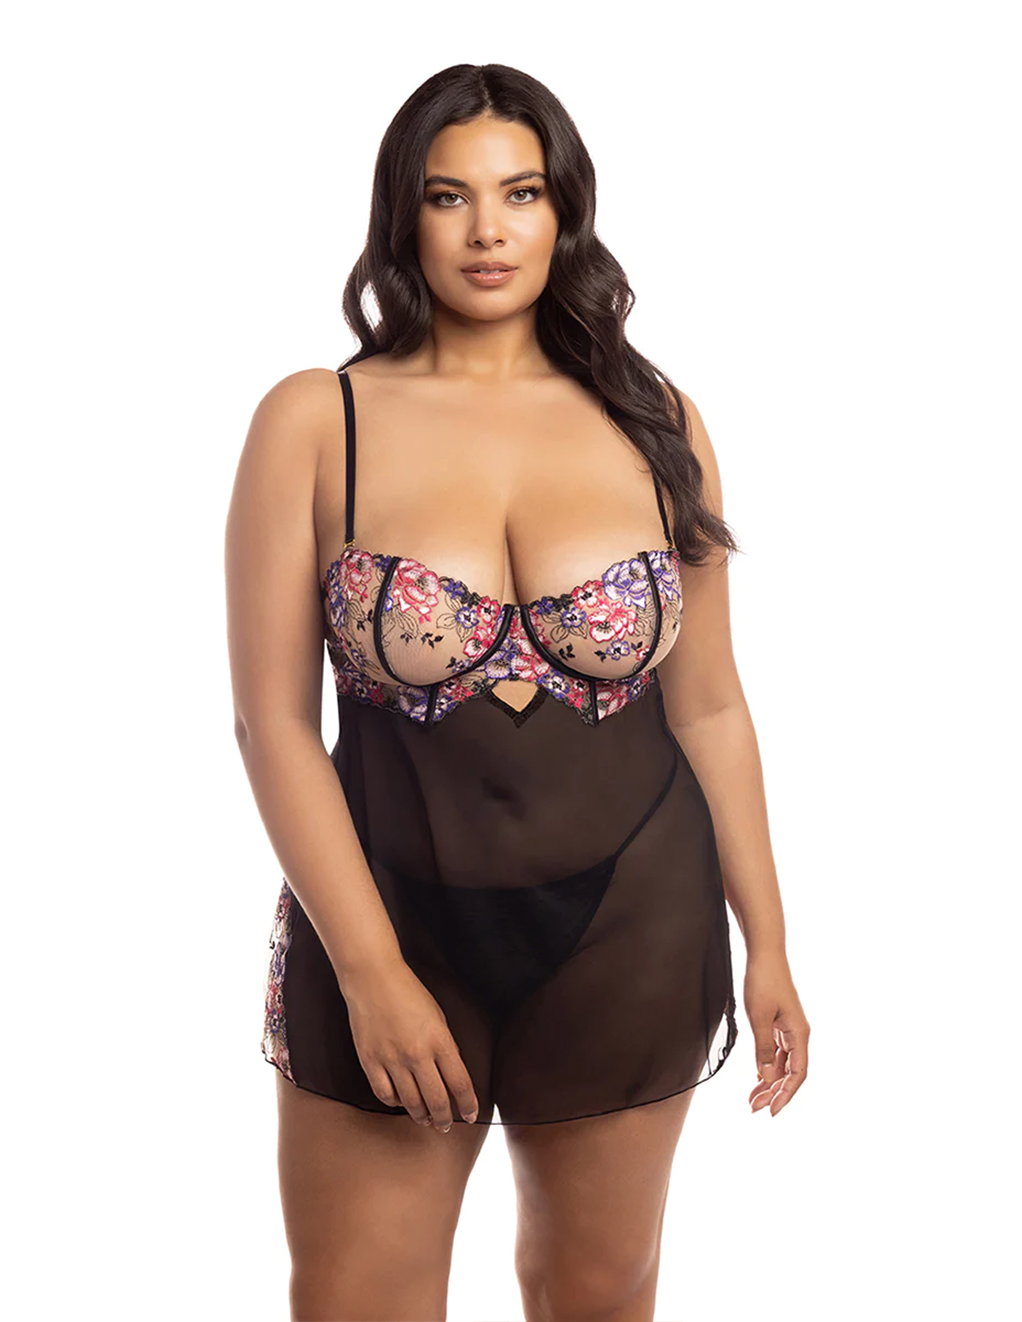 Nadia Hot Cheri Embroidered Underwire Babydoll